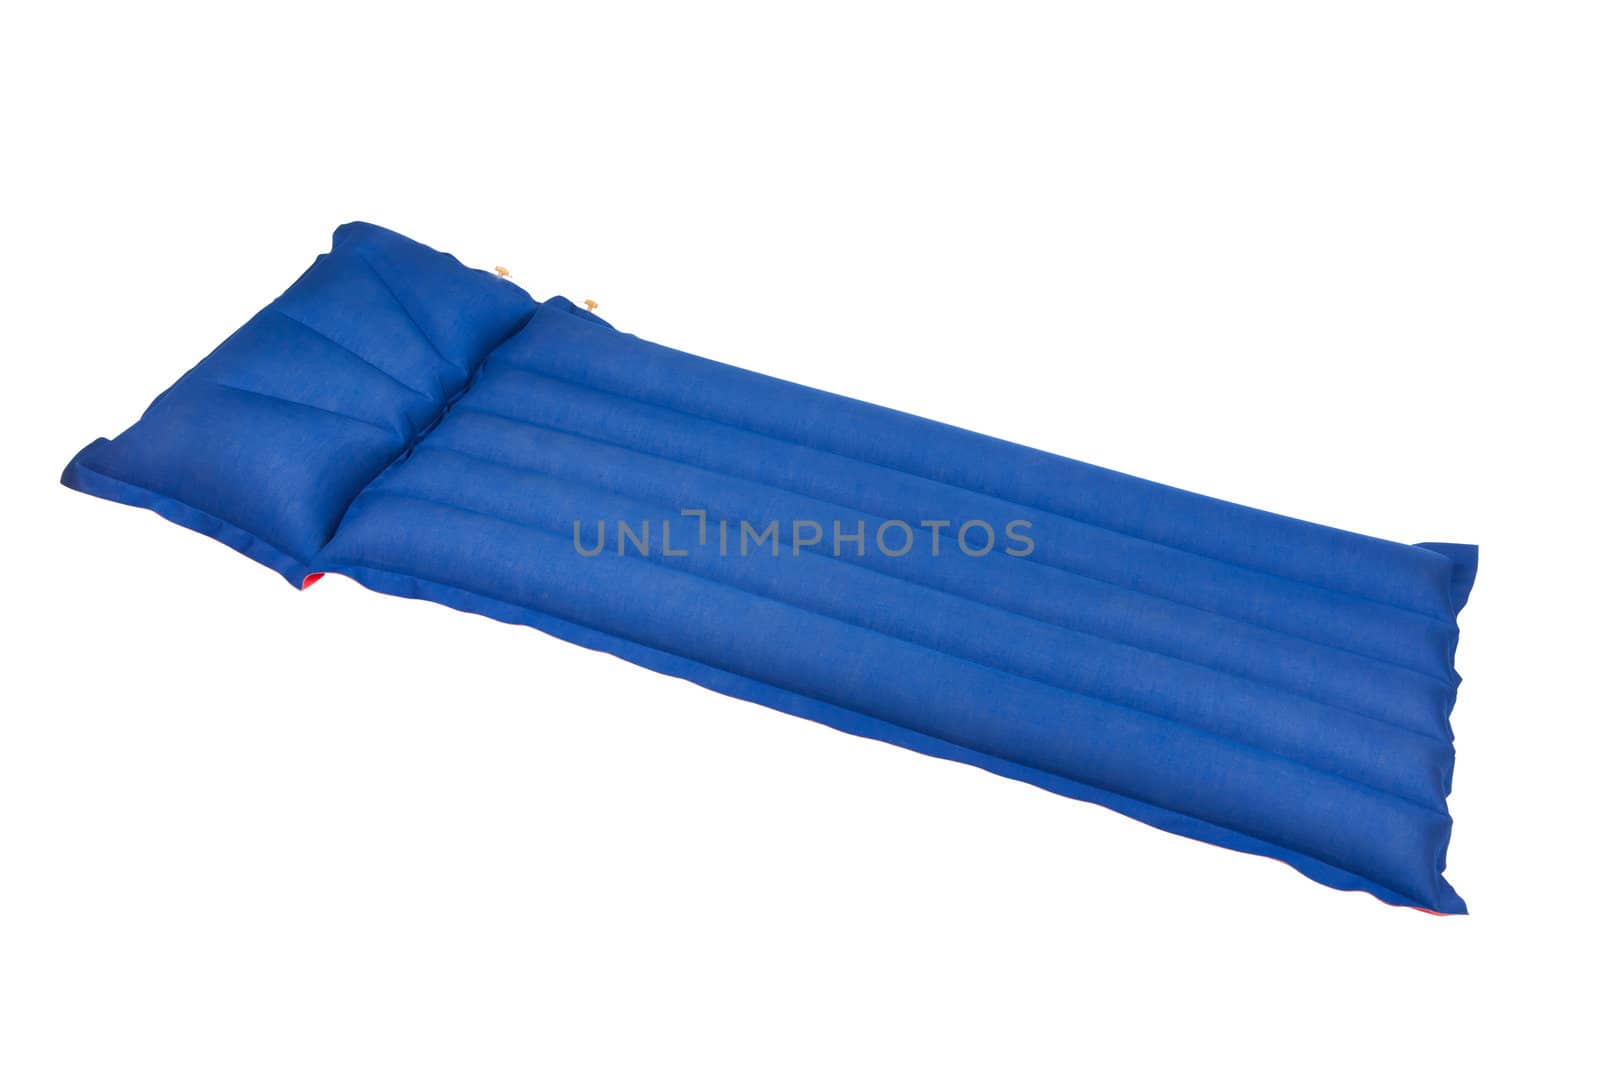 Inflatable beach mattress isolated on white background